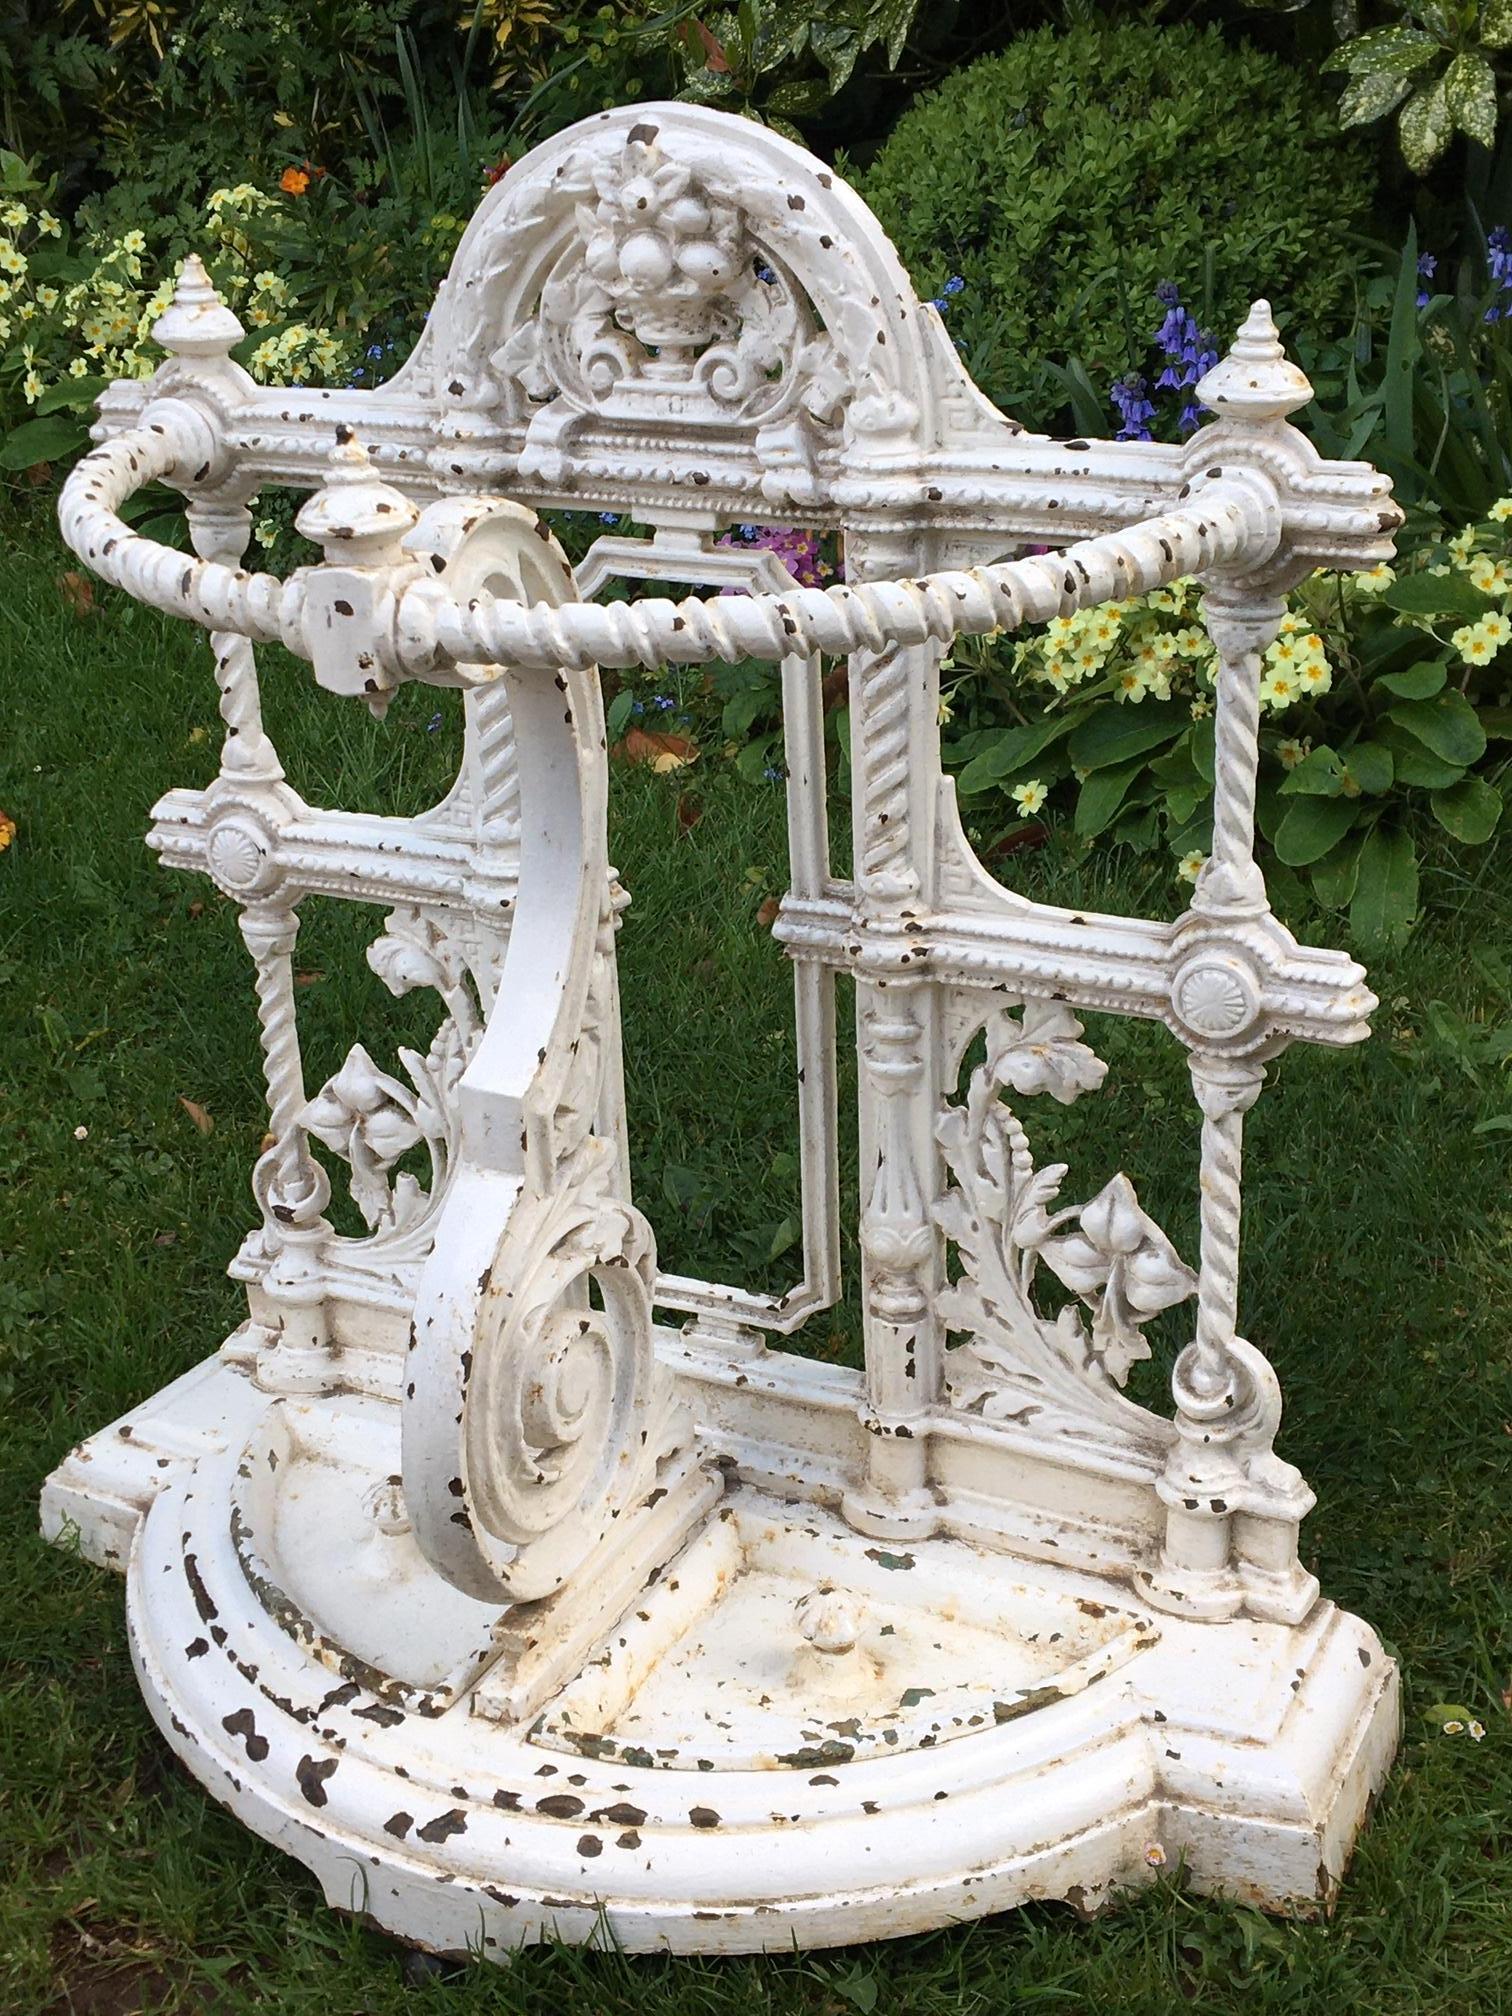 Good solid cast iron umbrella / cane stand from the mid-1800s
This English stand is ideal for an entrance hall or lobby.
Shown here In unrestored condition, with small paint chips but no cracks, damage or repairs.
There are 2 lift out drip trays and